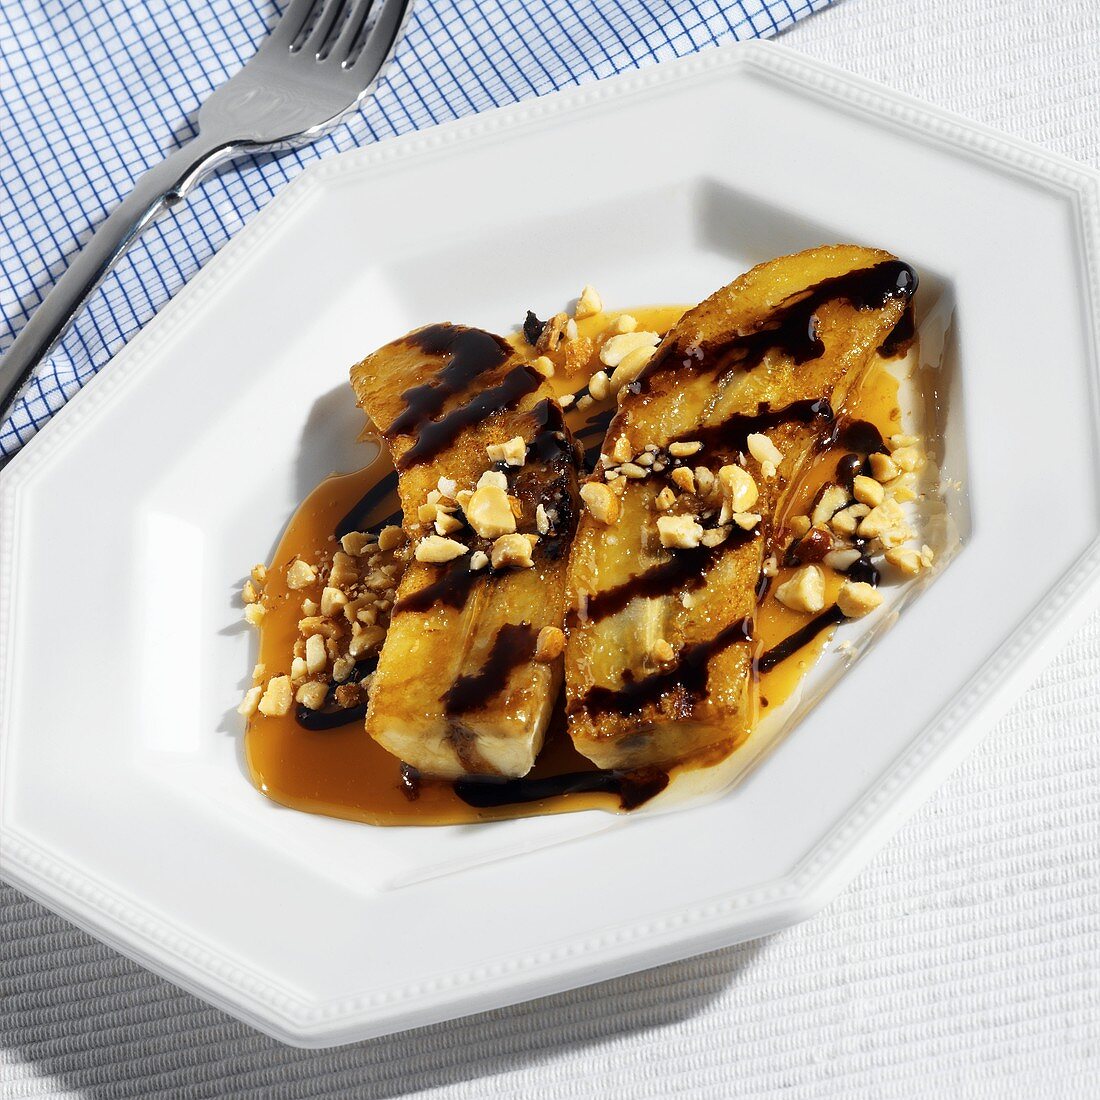 Fried banana with caramel, chocolate sauce and nuts